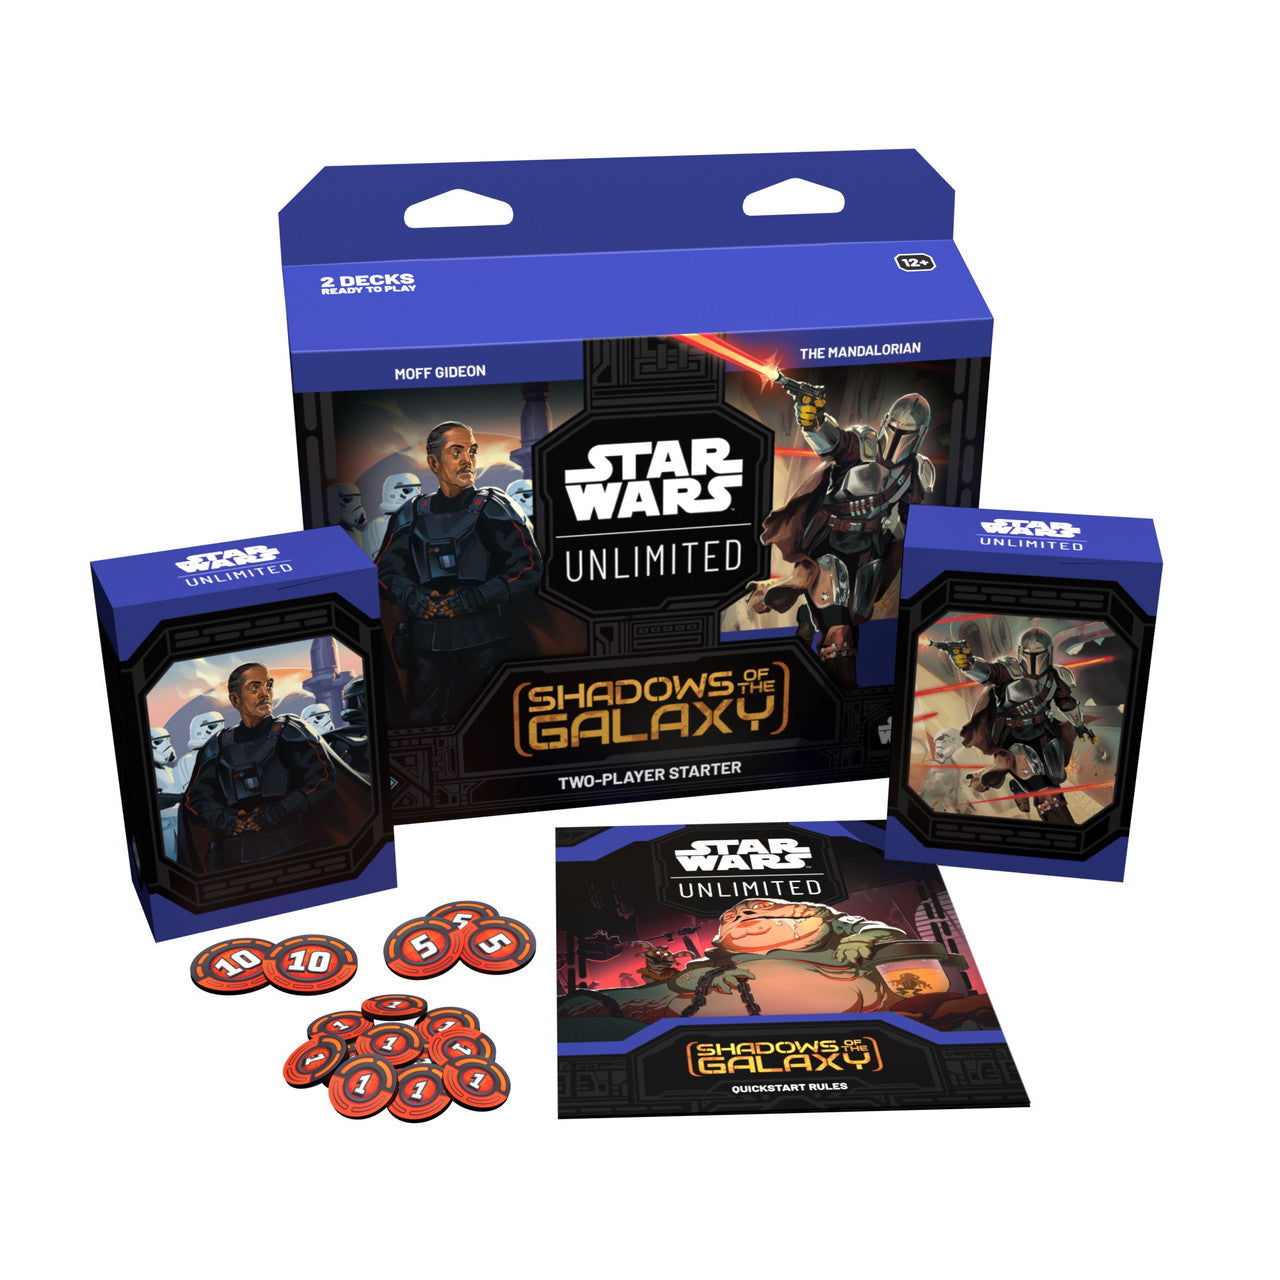 Star Wars Unlimited: Shadows of the Galaxy Starter Deck